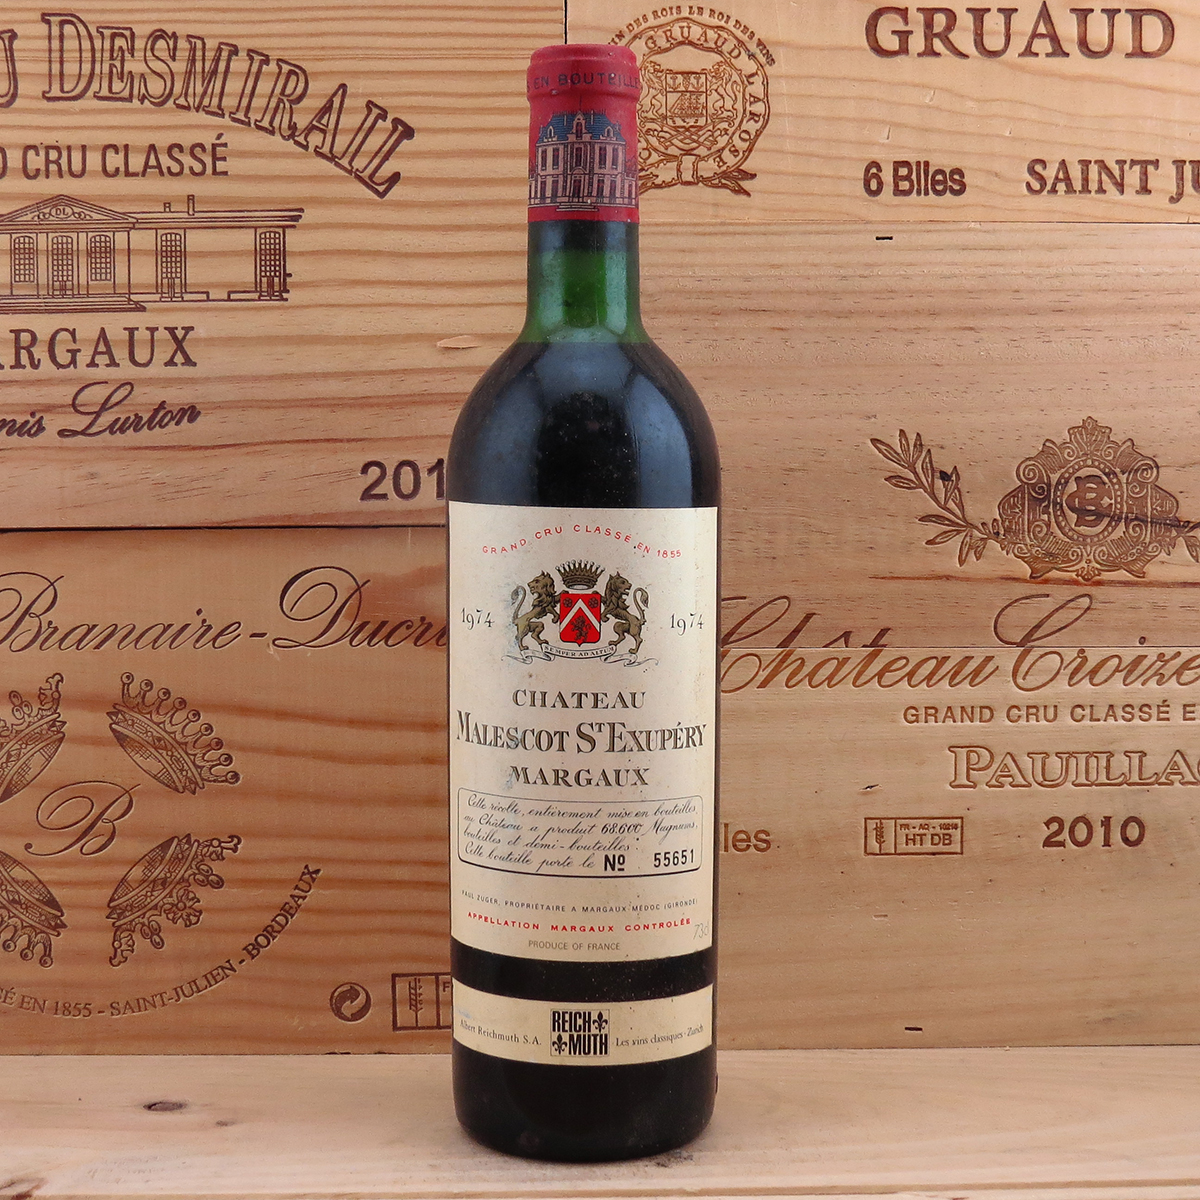 1974 Chateau Malescot St. Exupery